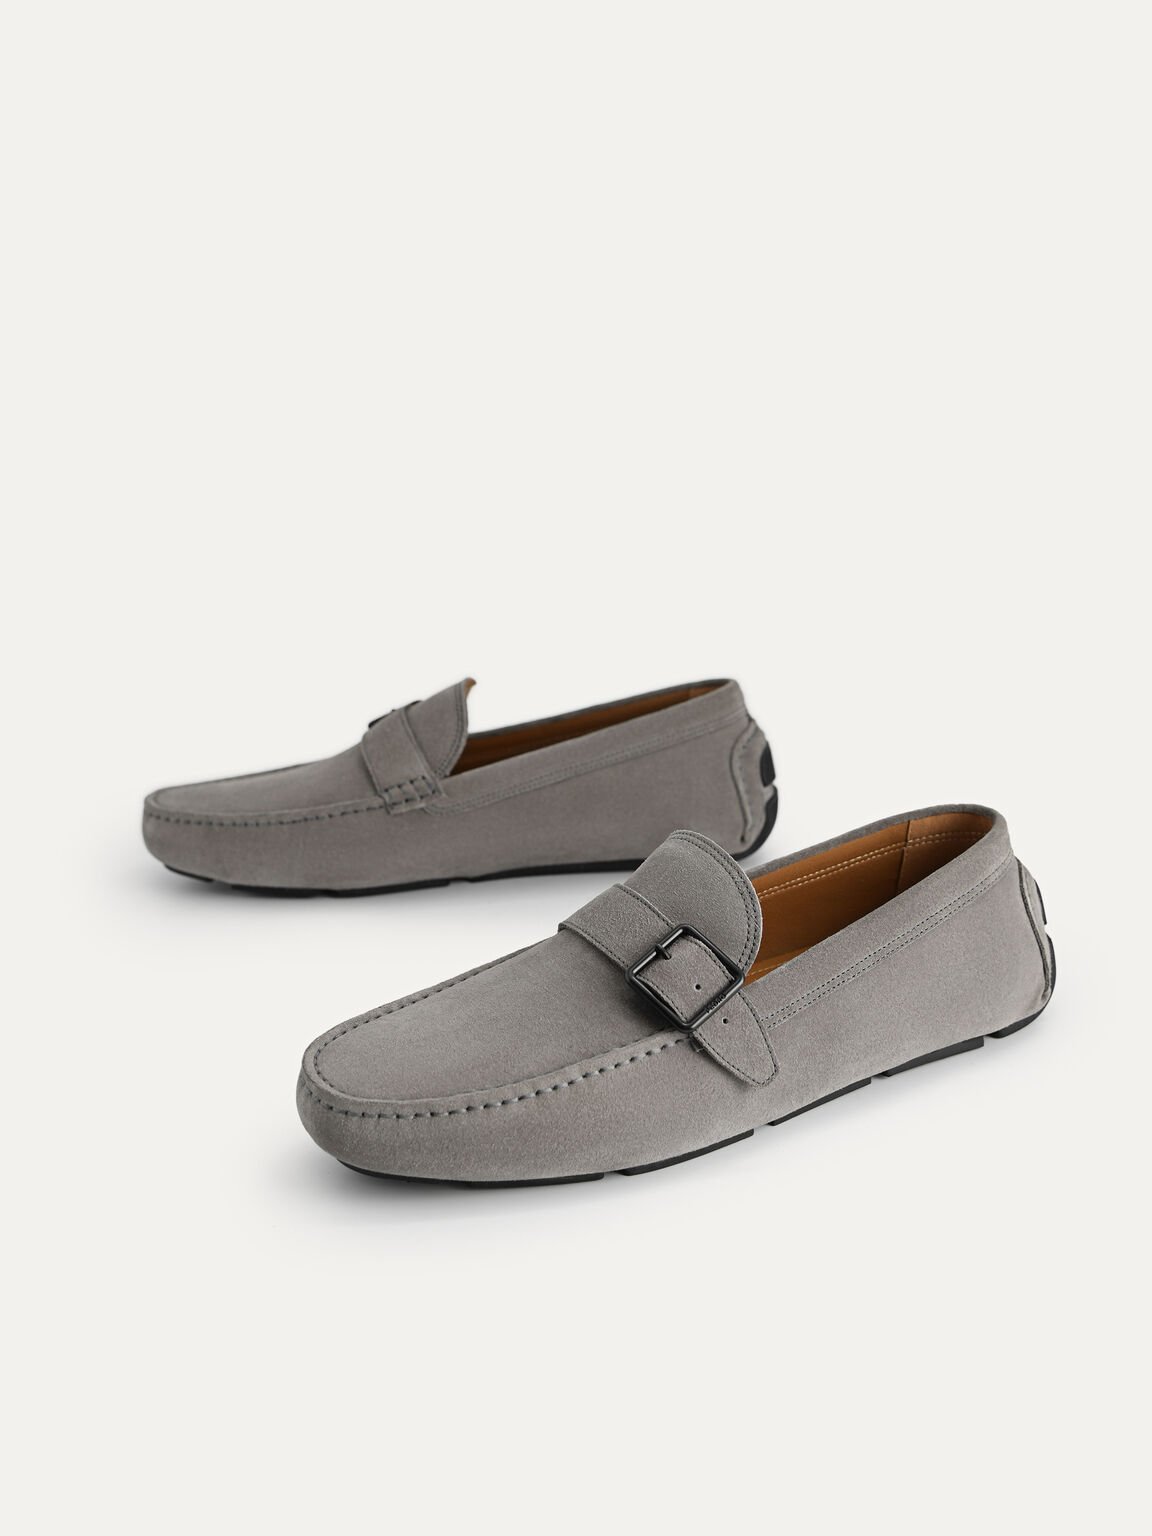 Suede Leather Moccasins with Buckle Detailing, Grey